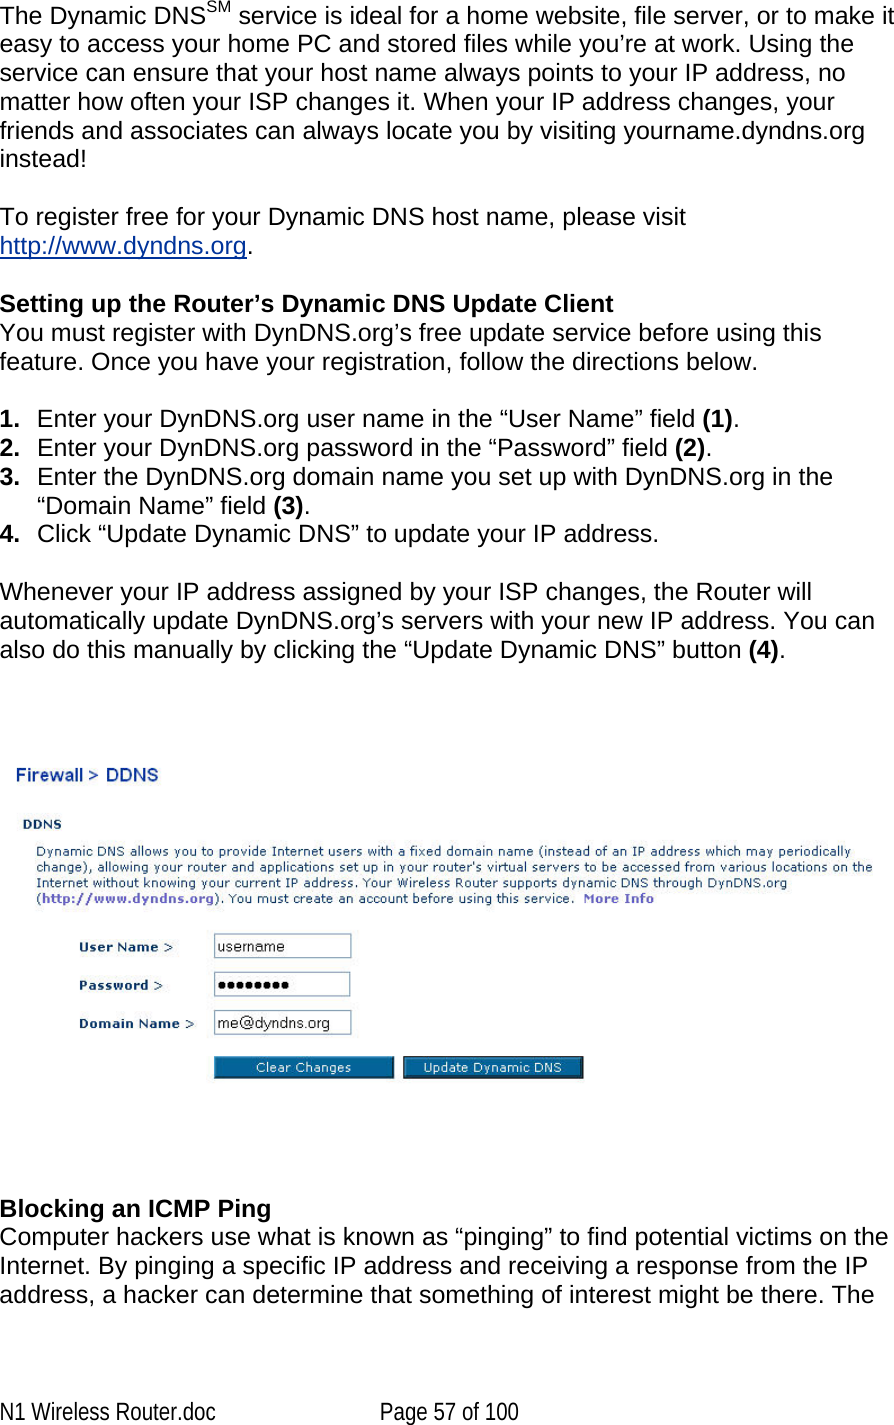   The Dynamic DNSSM service is ideal for a home website, file server, or to make it easy to access your home PC and stored files while you’re at work. Using the service can ensure that your host name always points to your IP address, no matter how often your ISP changes it. When your IP address changes, your friends and associates can always locate you by visiting yourname.dyndns.org instead! To register free for your Dynamic DNS host name, please visit http://www.dyndns.org. Setting up the Router’s Dynamic DNS Update Client You must register with DynDNS.org’s free update service before using this feature. Once you have your registration, follow the directions below. 1.  Enter your DynDNS.org user name in the “User Name” field (1). 2.  Enter your DynDNS.org password in the “Password” field (2). 3.  Enter the DynDNS.org domain name you set up with DynDNS.org in the “Domain Name” field (3). 4.  Click “Update Dynamic DNS” to update your IP address. Whenever your IP address assigned by your ISP changes, the Router will automatically update DynDNS.org’s servers with your new IP address. You can also do this manually by clicking the “Update Dynamic DNS” button (4).       Blocking an ICMP Ping  Computer hackers use what is known as “pinging” to find potential victims on the Internet. By pinging a specific IP address and receiving a response from the IP address, a hacker can determine that something of interest might be there. The N1 Wireless Router.doc  Page 57 of 100 